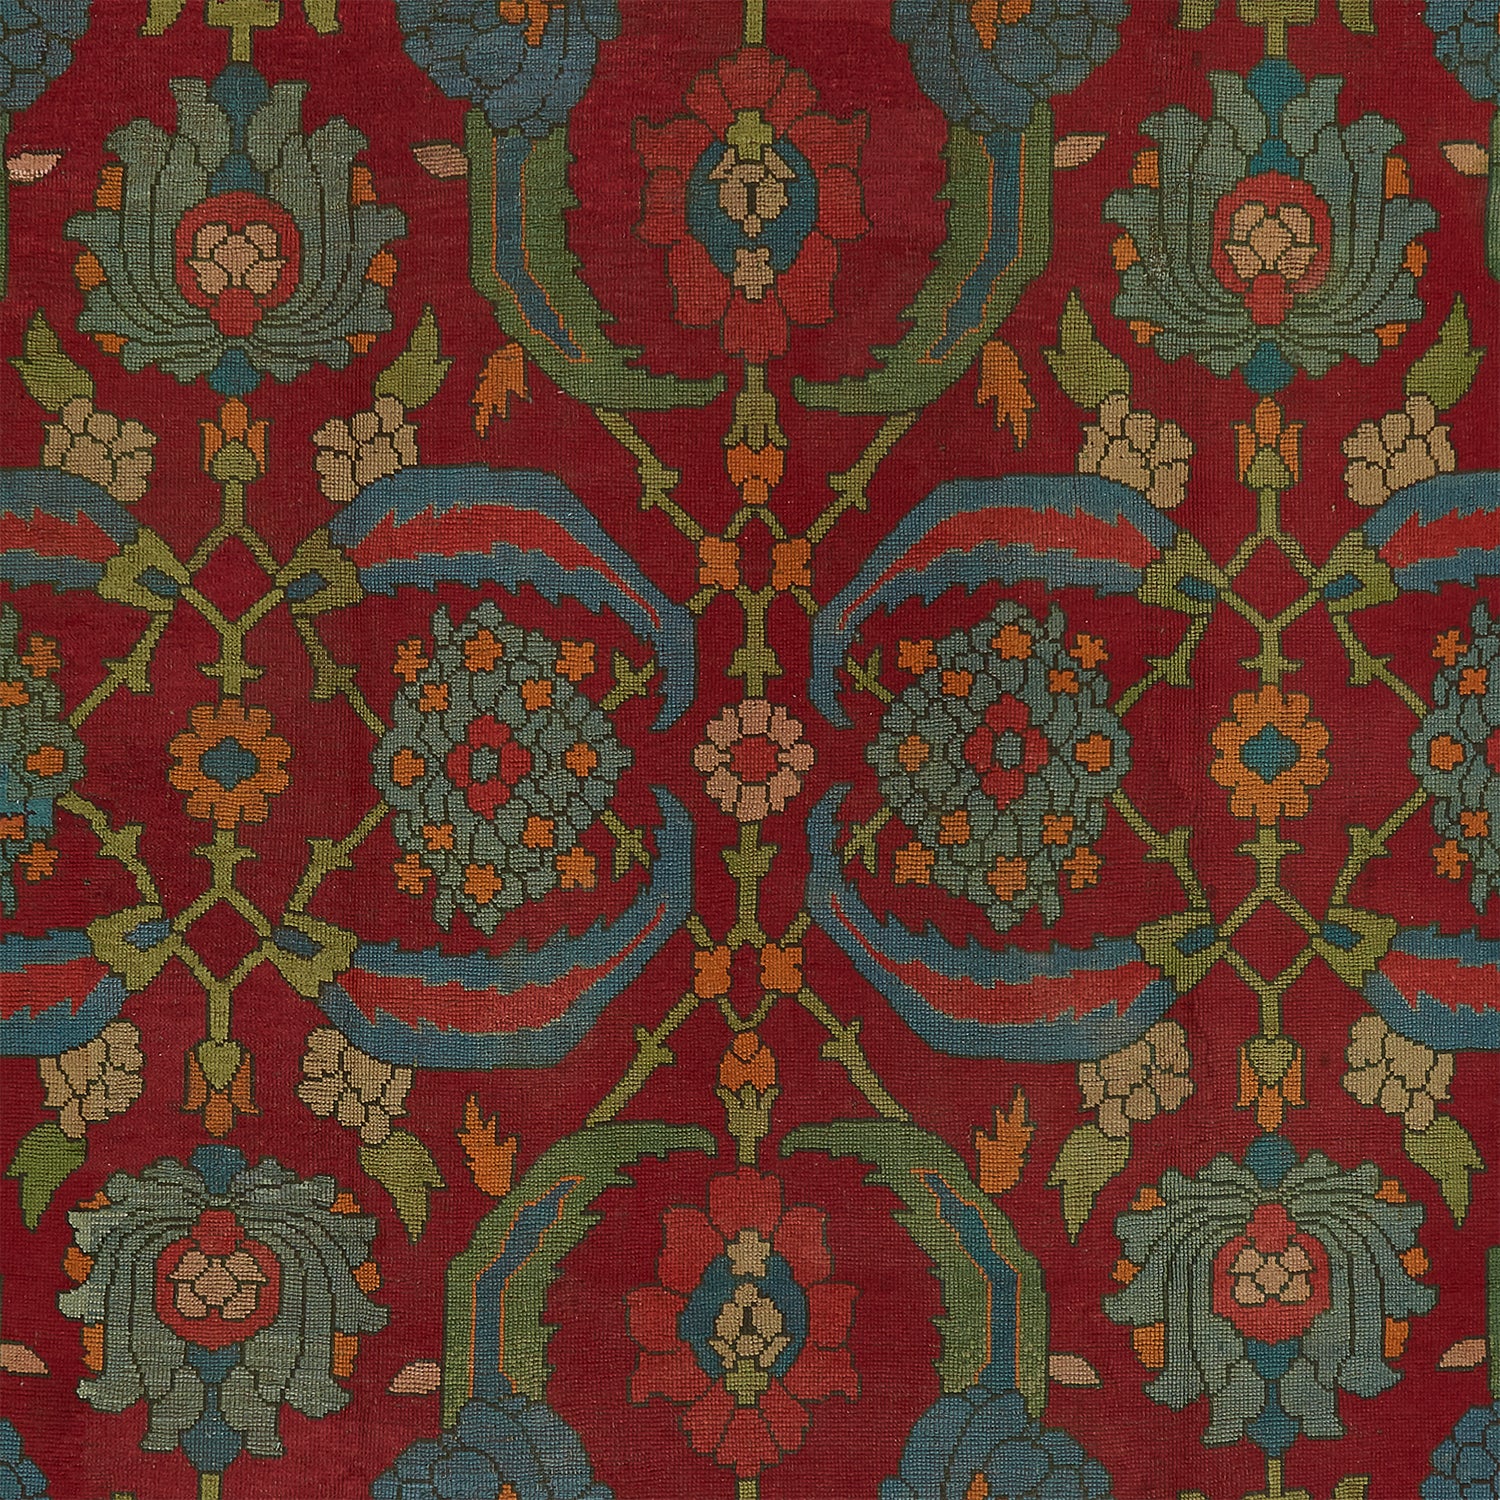 Symmetrical, ornamental carpet design with stylized floral motifs and vibrant colors.